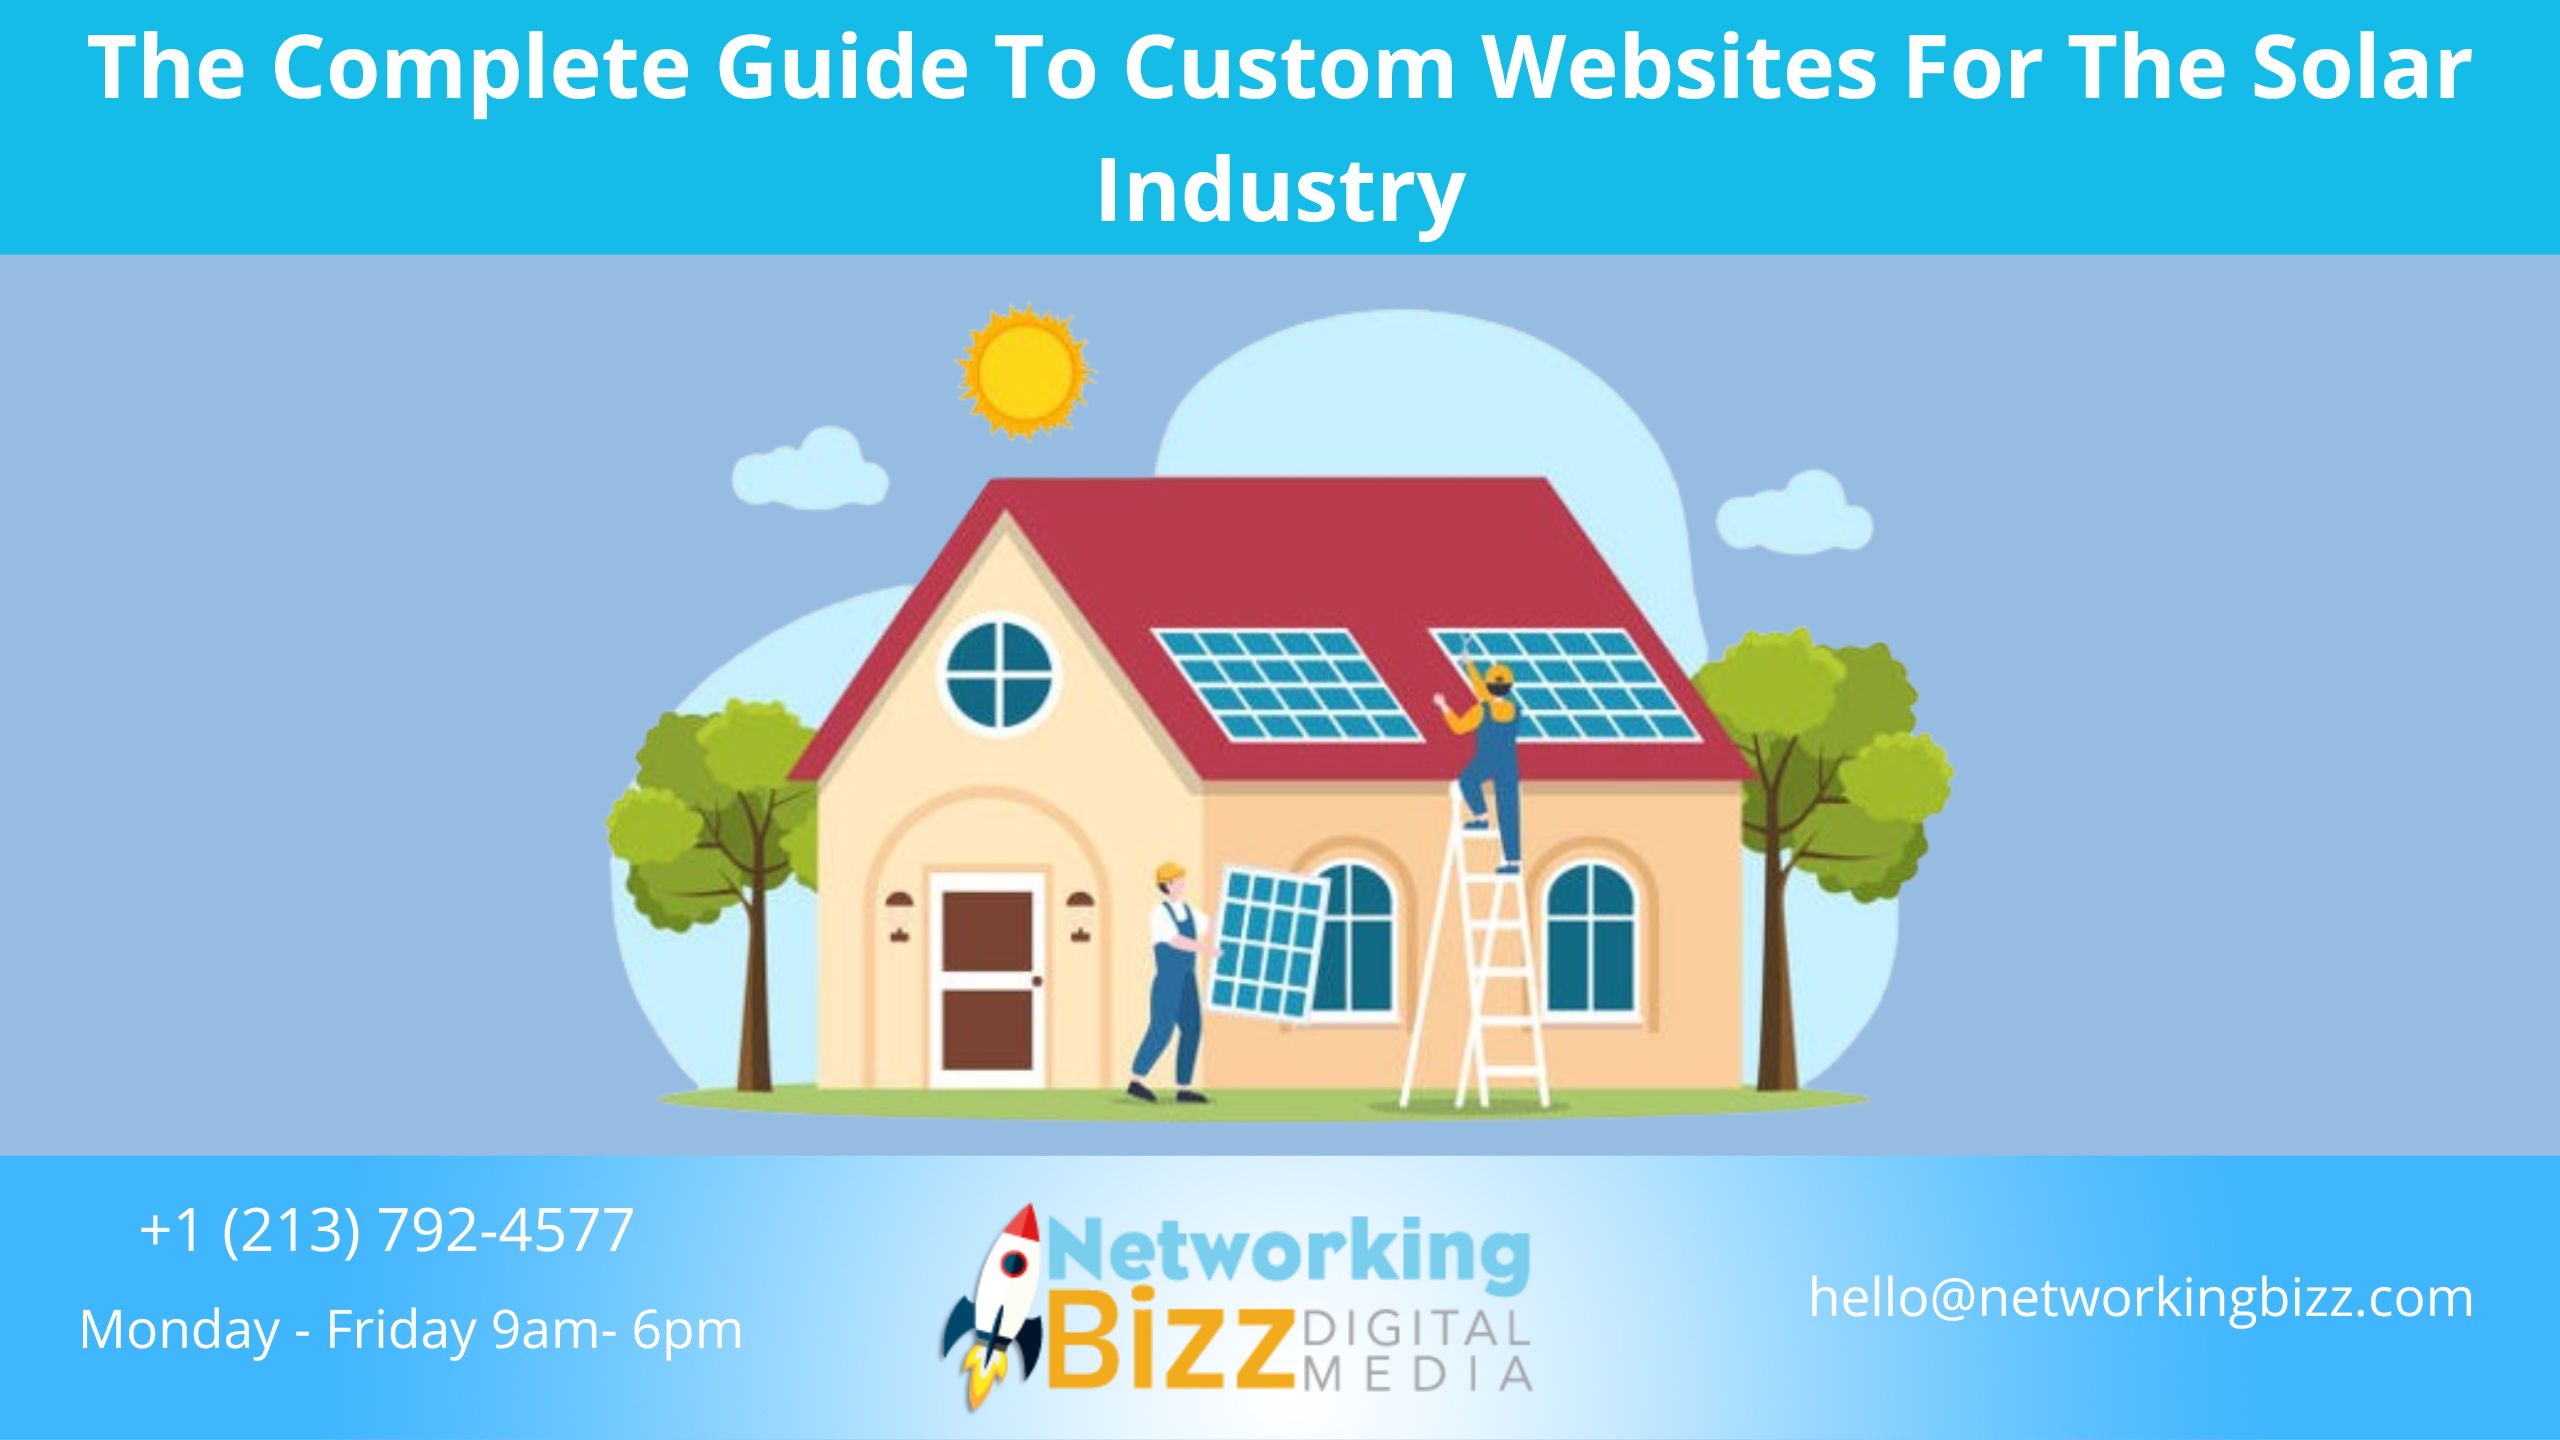 The Complete Guide To Custom Websites For The Solar Industry